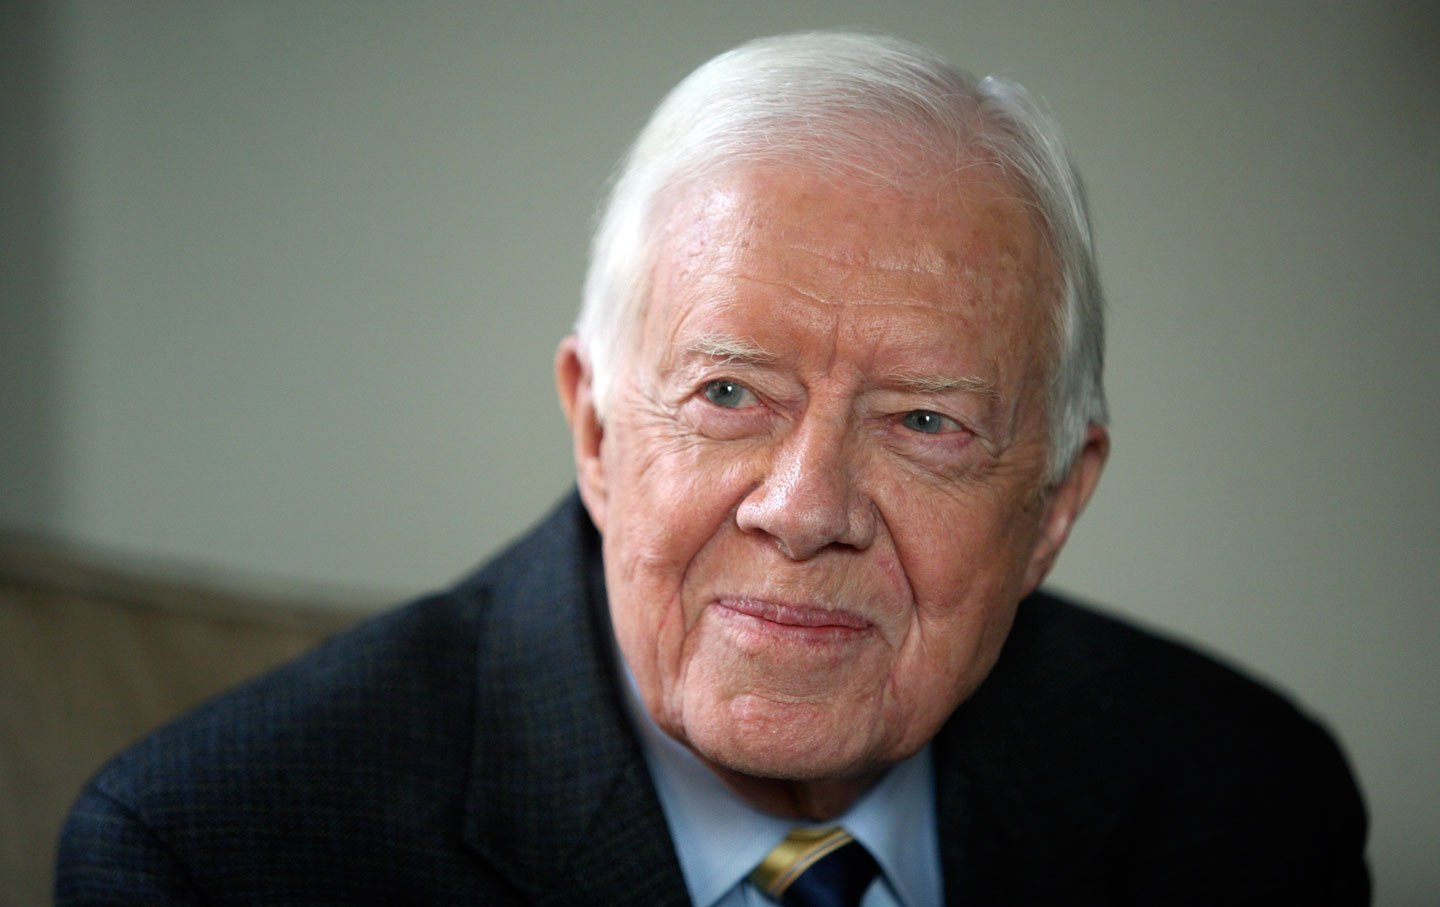 jimmy carter says there should be an age limit on presidency